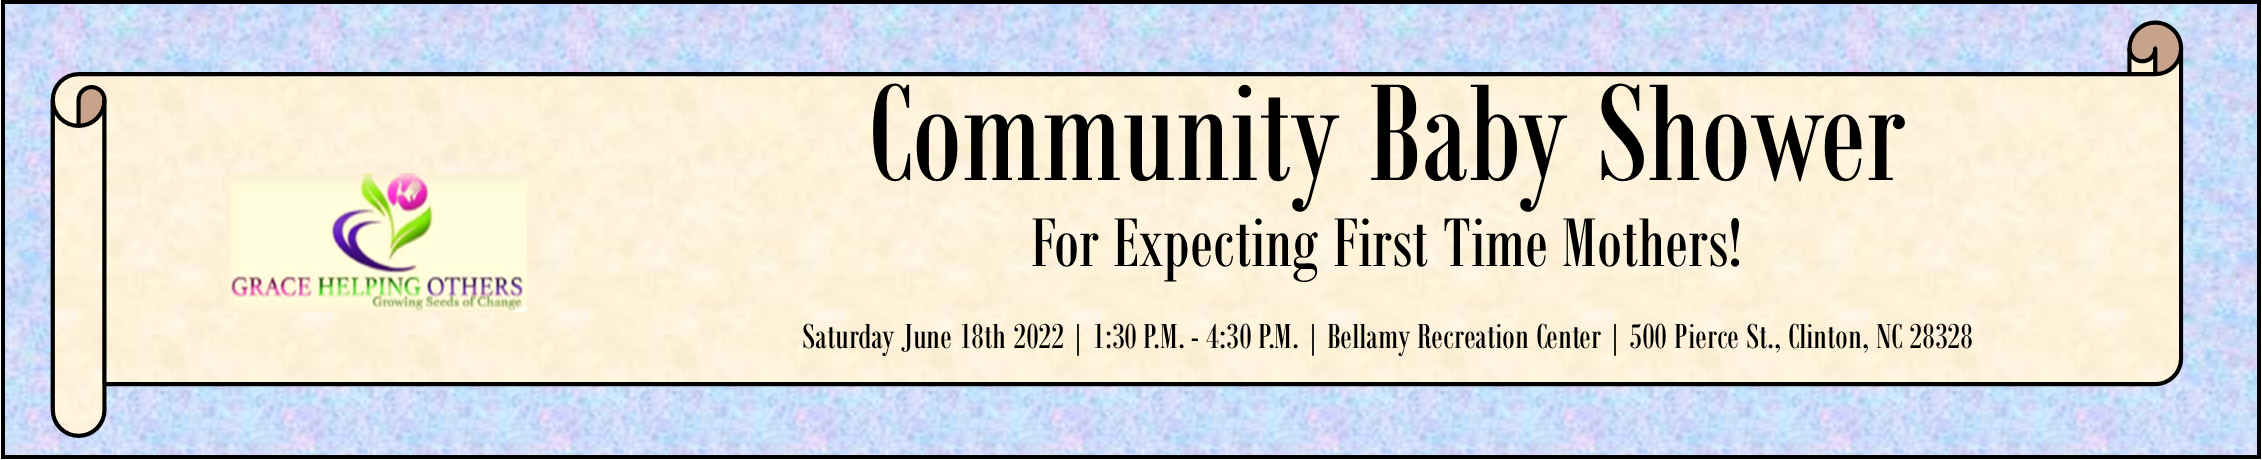 Community Baby Shower Home Page Banner